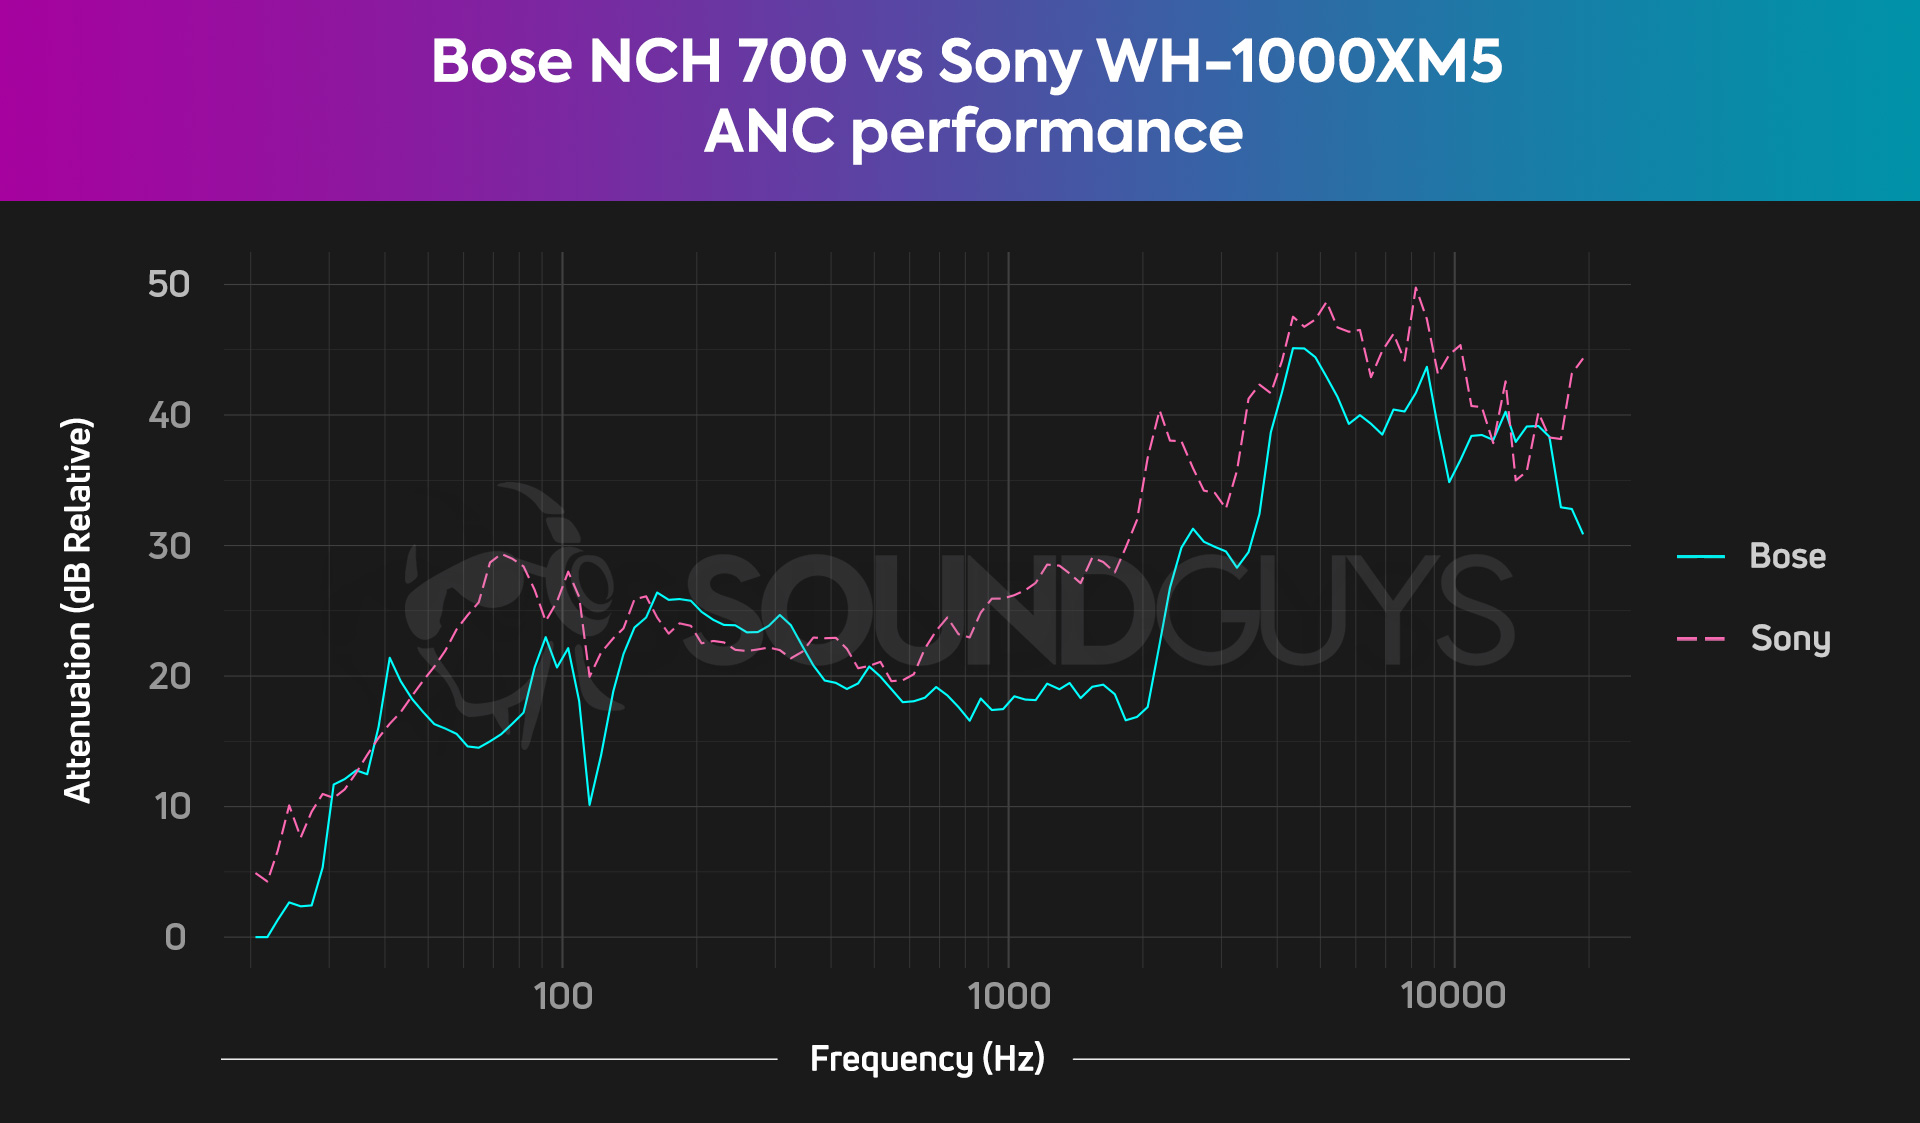 A chart compares the noise cancelling of the Bose NCH 700 and Sony WH-1000XM5 to show that the Sony has better attenuation across the frequency spectrum.